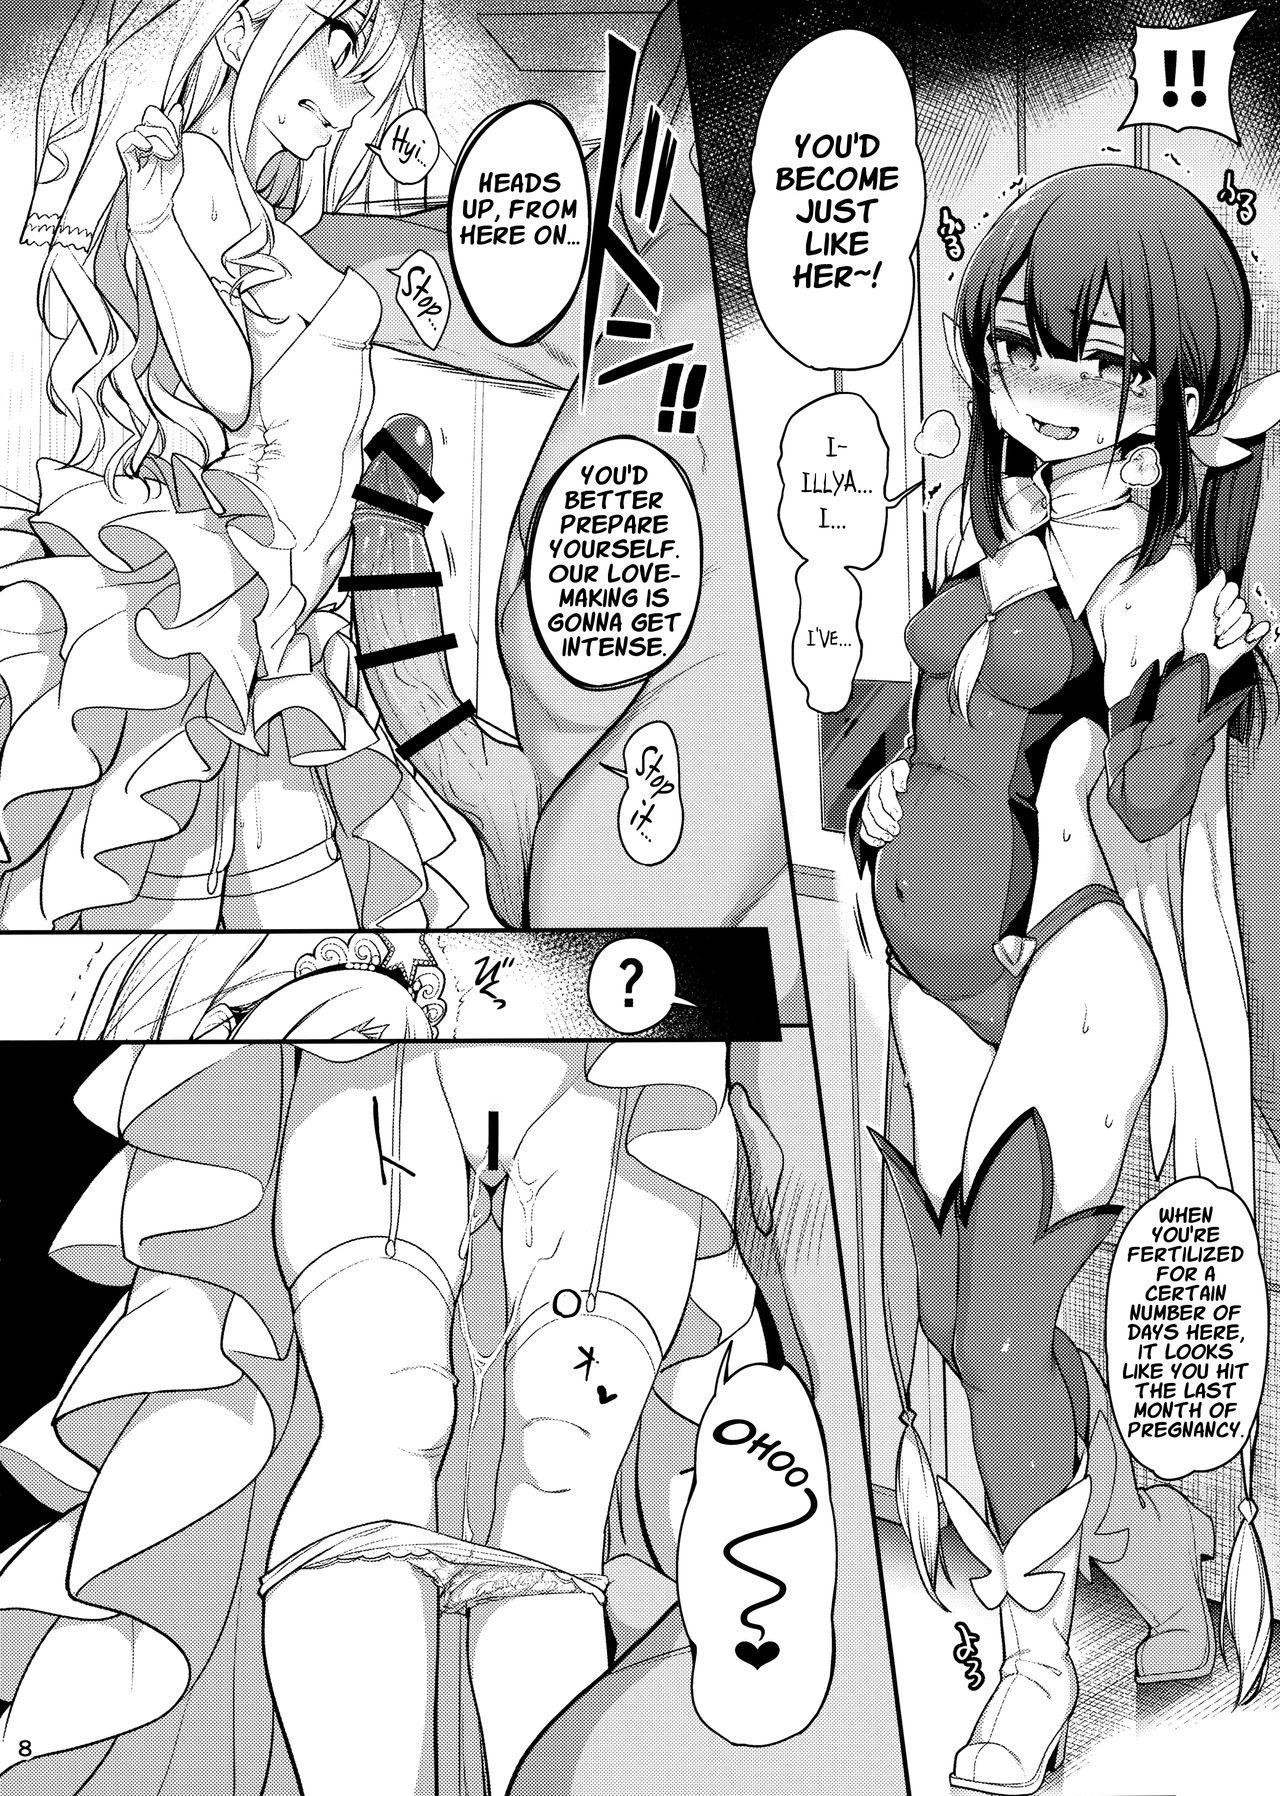 Cute Mahou Shoujo Saimin PakopaCause GAME OVER | Magical Girl Hypnosis Fucking Marathon GAME OVER - Fate grand order Fate kaleid liner prisma illya Pussy Orgasm - Page 9